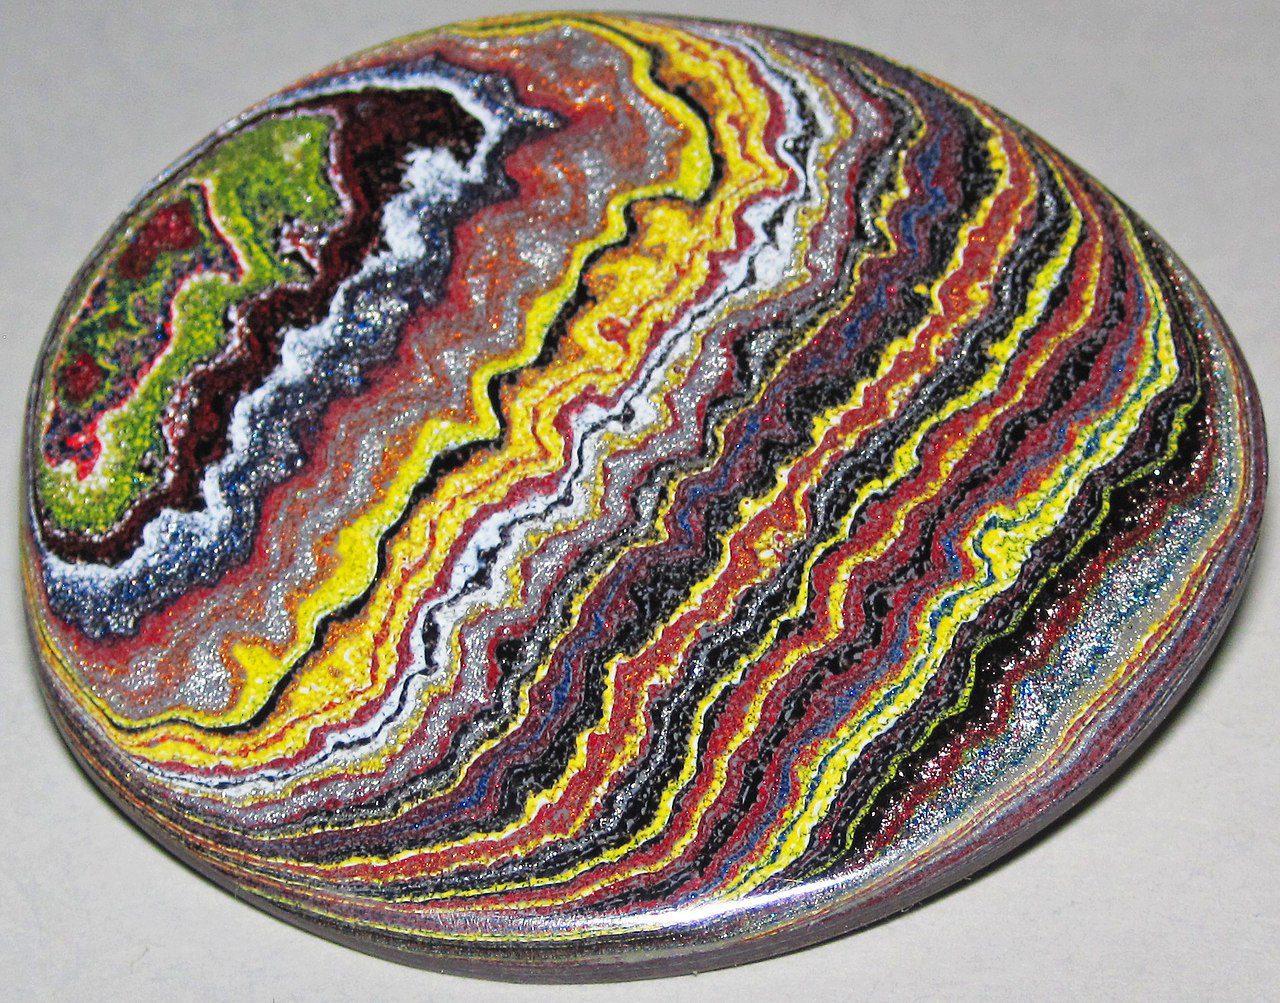 Fordite is a lapidarist's term for polished pieces of finely-layered, multicolored paint masses derived from painting rooms in automobile factories. The name is in reference to the Ford Motor Company. This material is also known as "Detroit Agate." (Credit: Wikimedia)